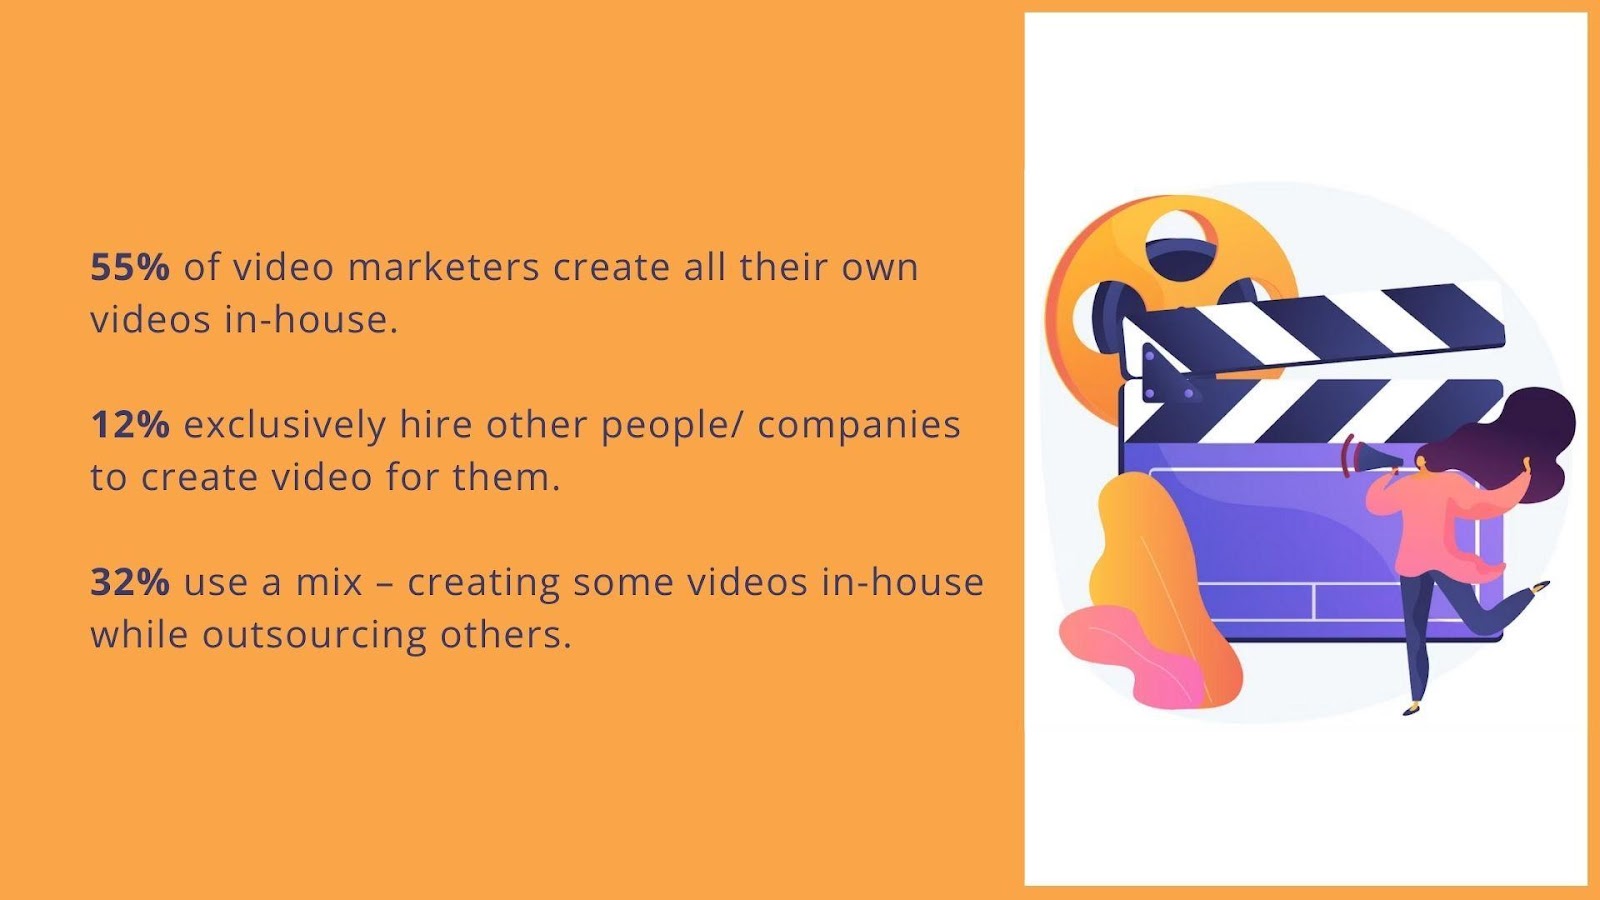 55% of video marketers create all their own videos in-house. 12% exclusively hire other people/ companies to create videos for them. 32% use a mix – creating some videos in-house while outsourcing others.